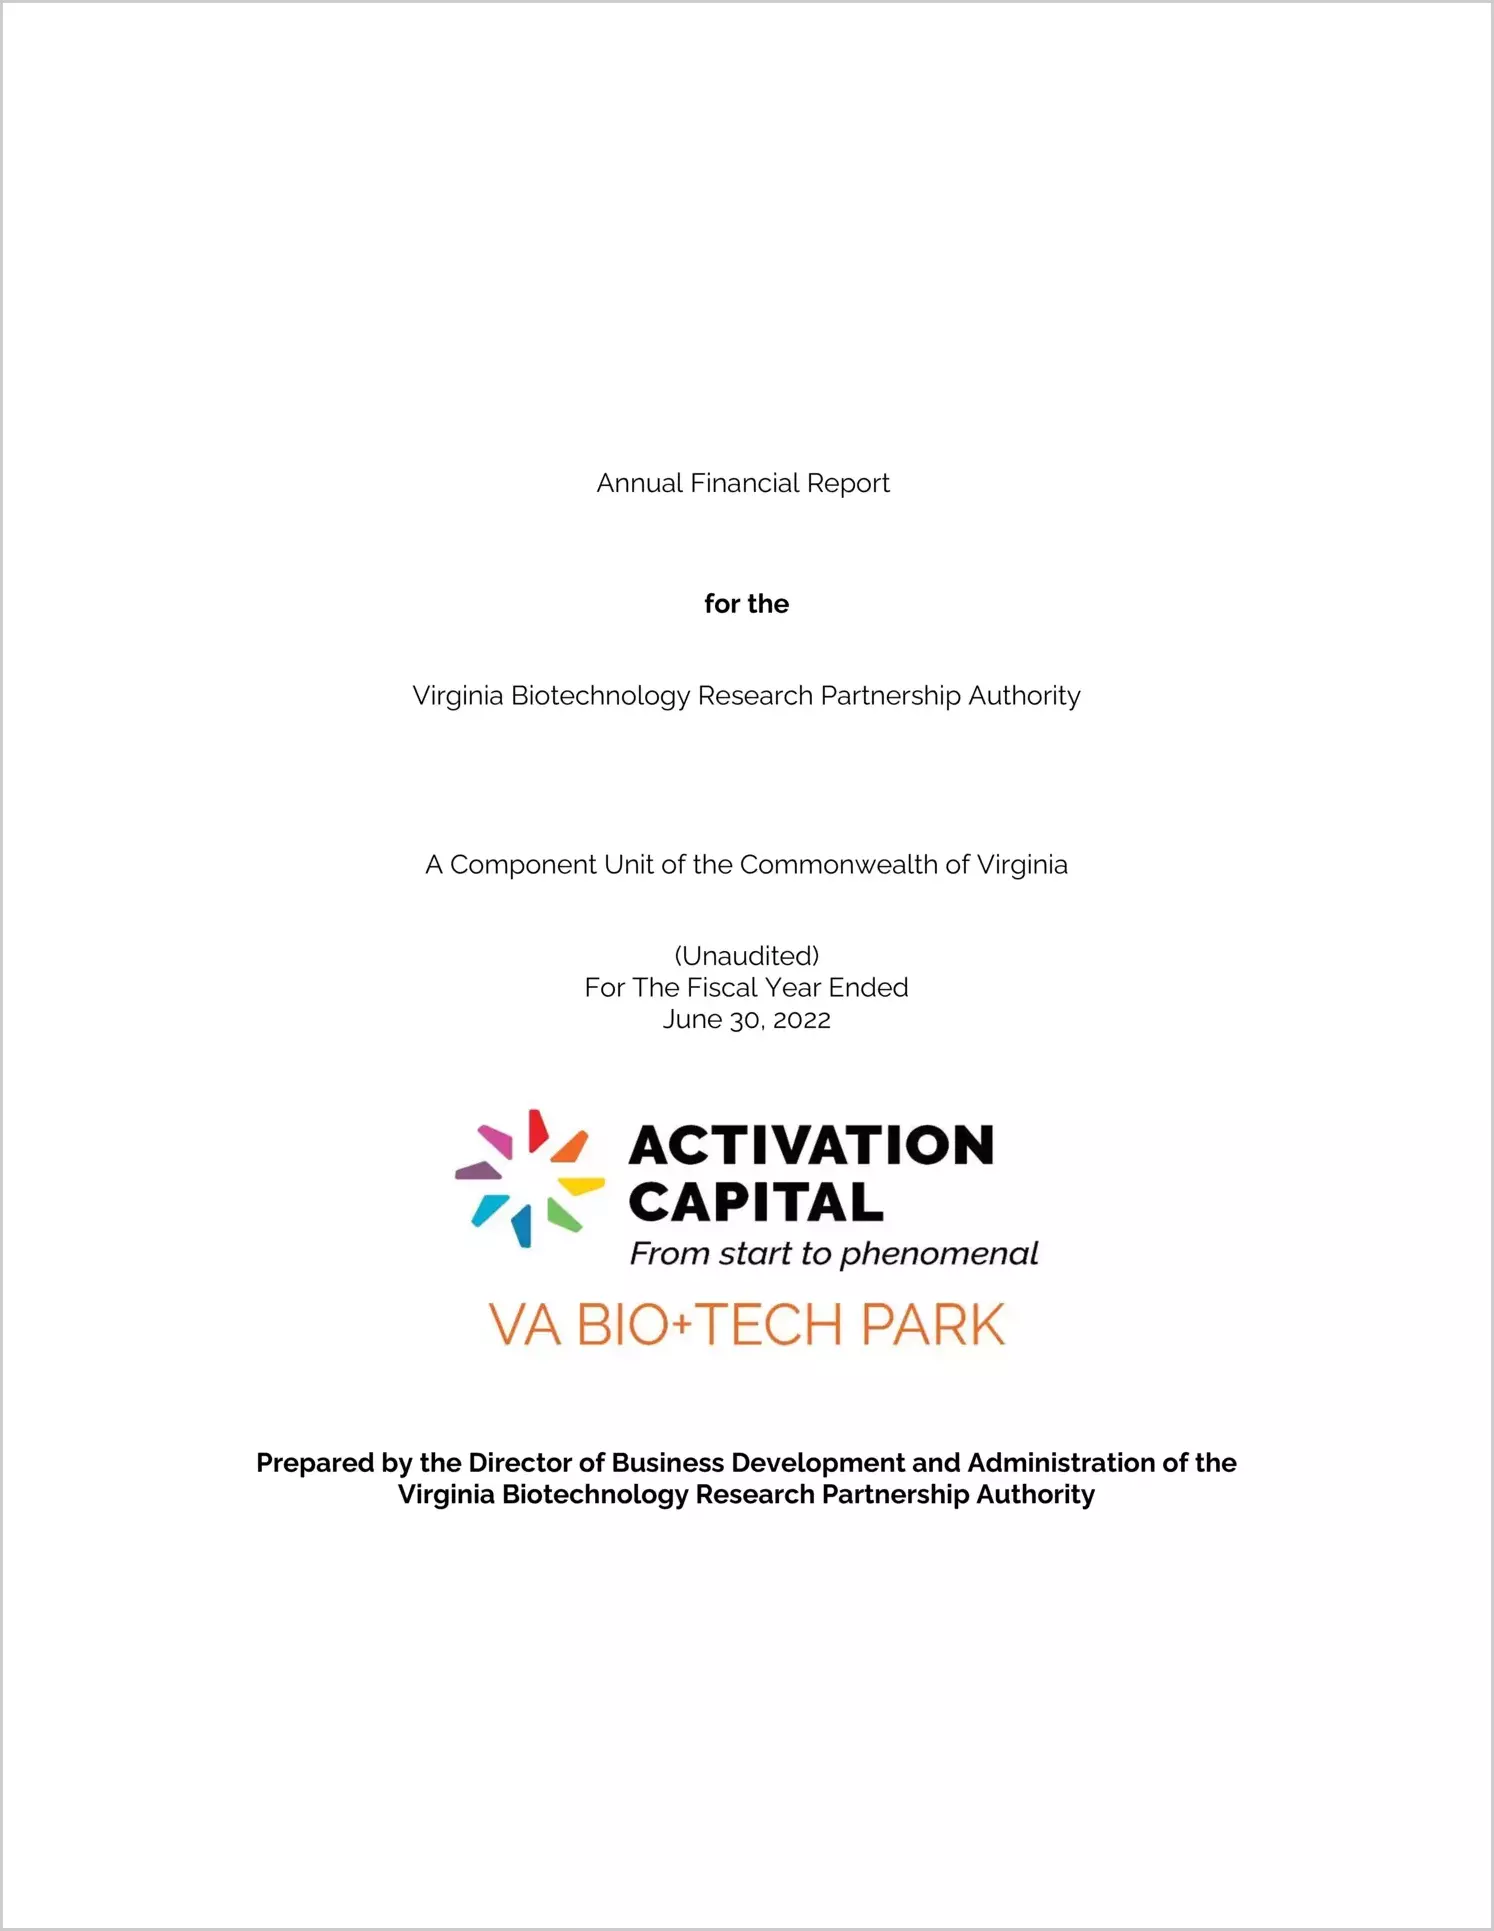 Virginia Biotechnology Research Partnership Authority Financial Statements for the year ended June 30, 2022